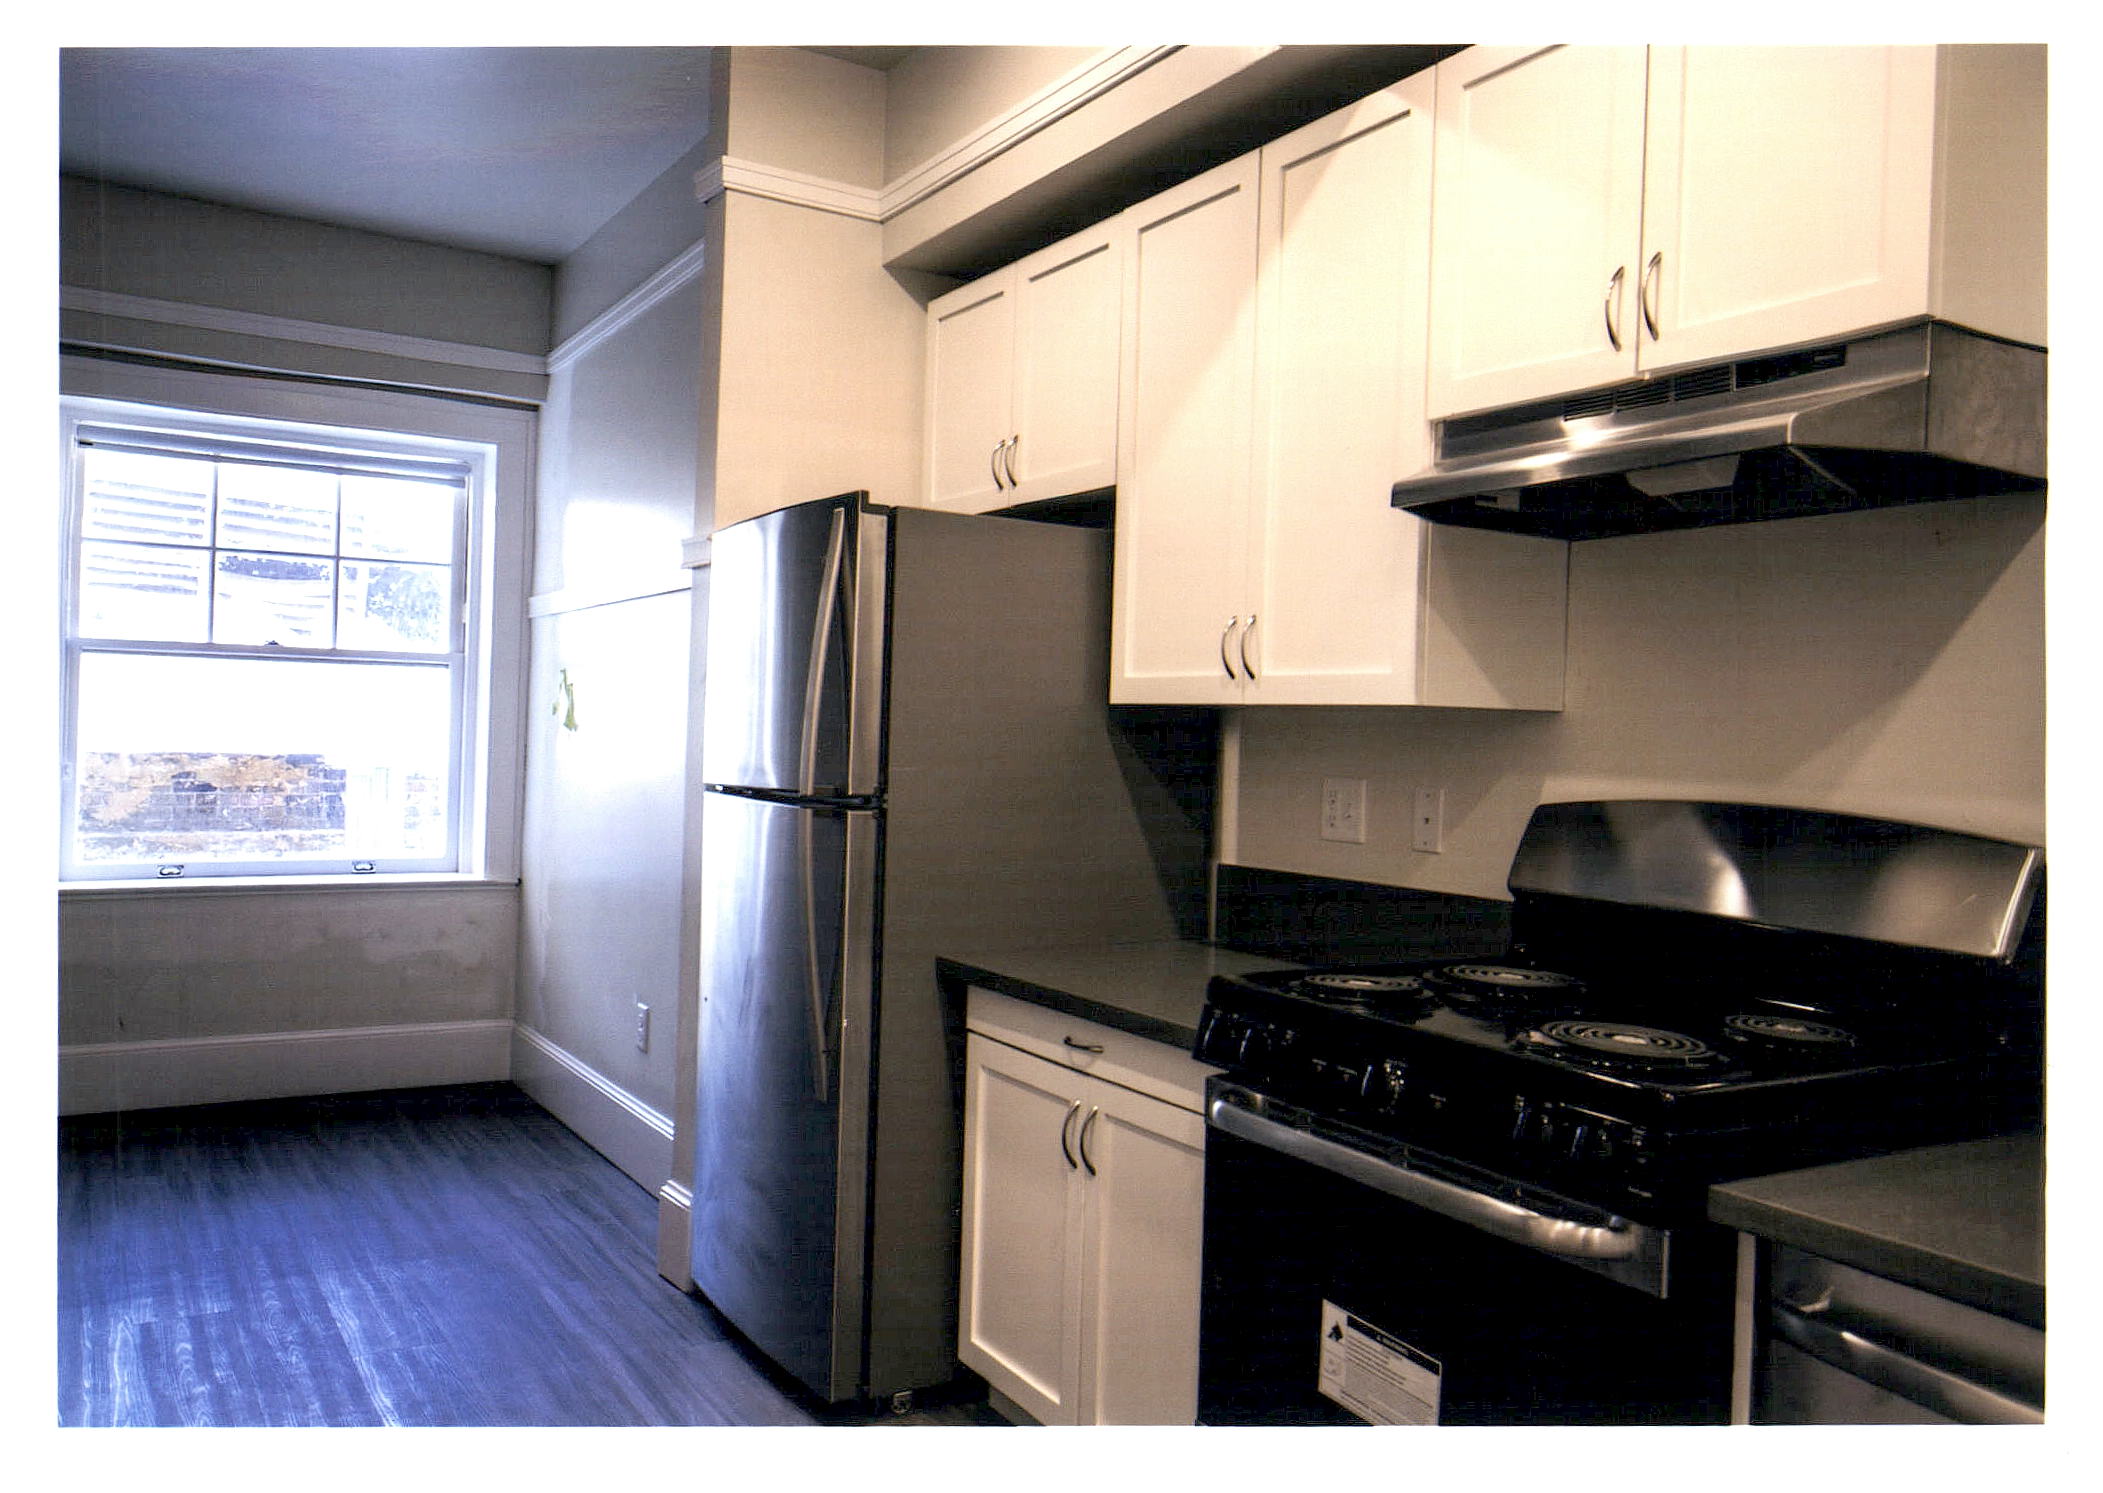 After: view of new kitchen and appliances.